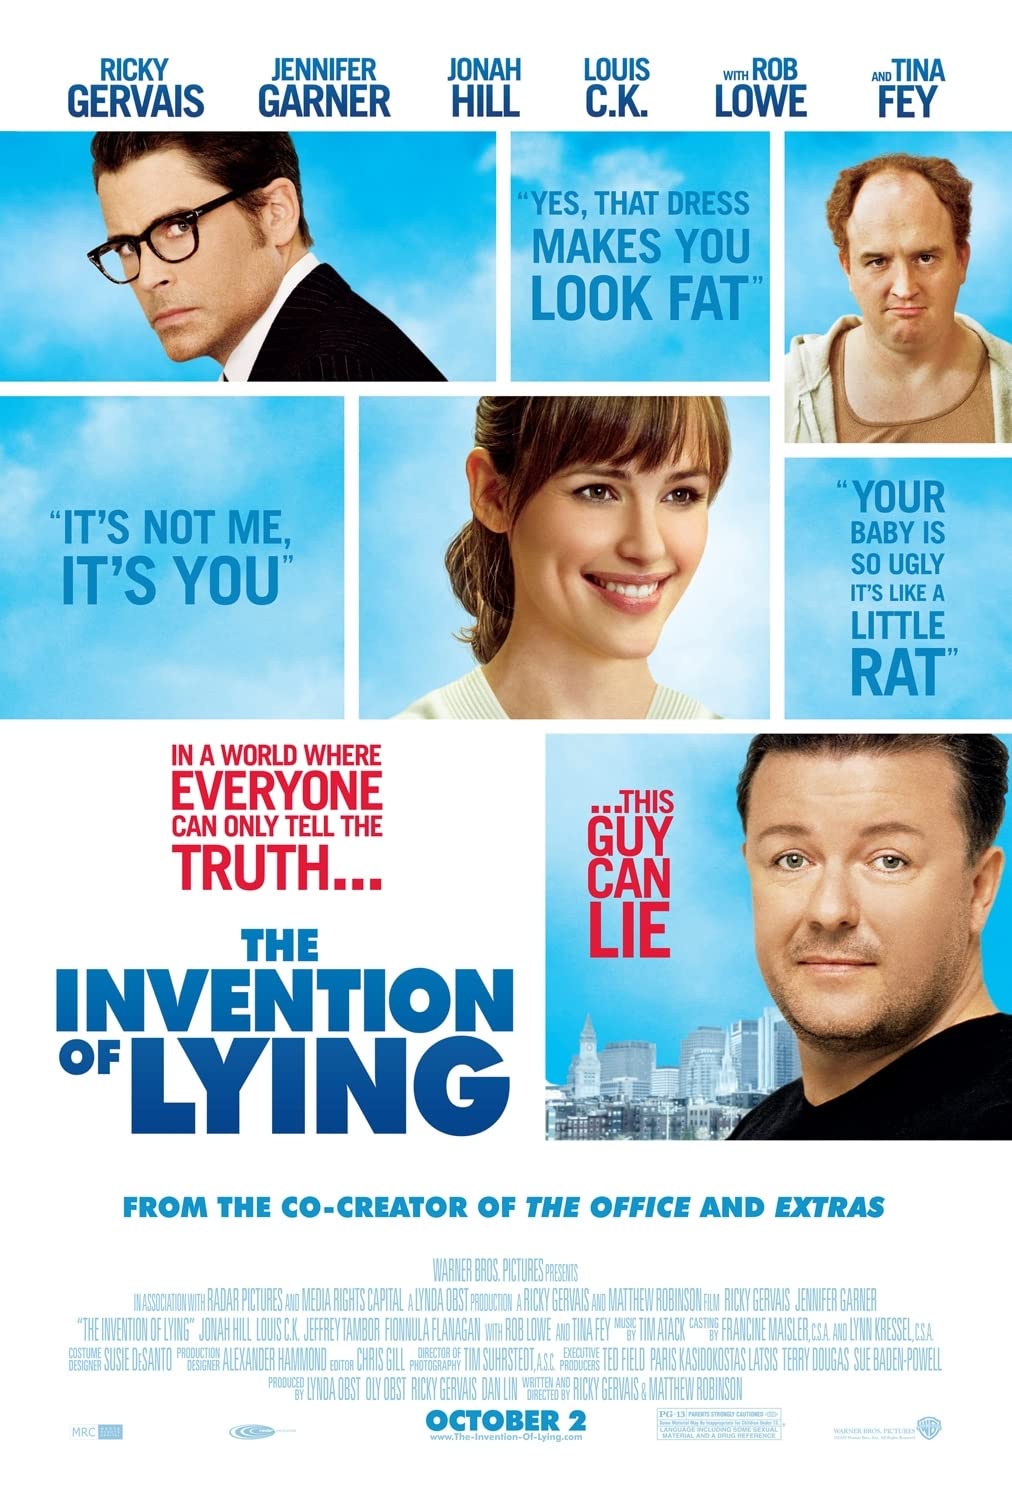 The Invention of Lying Promotional Poster